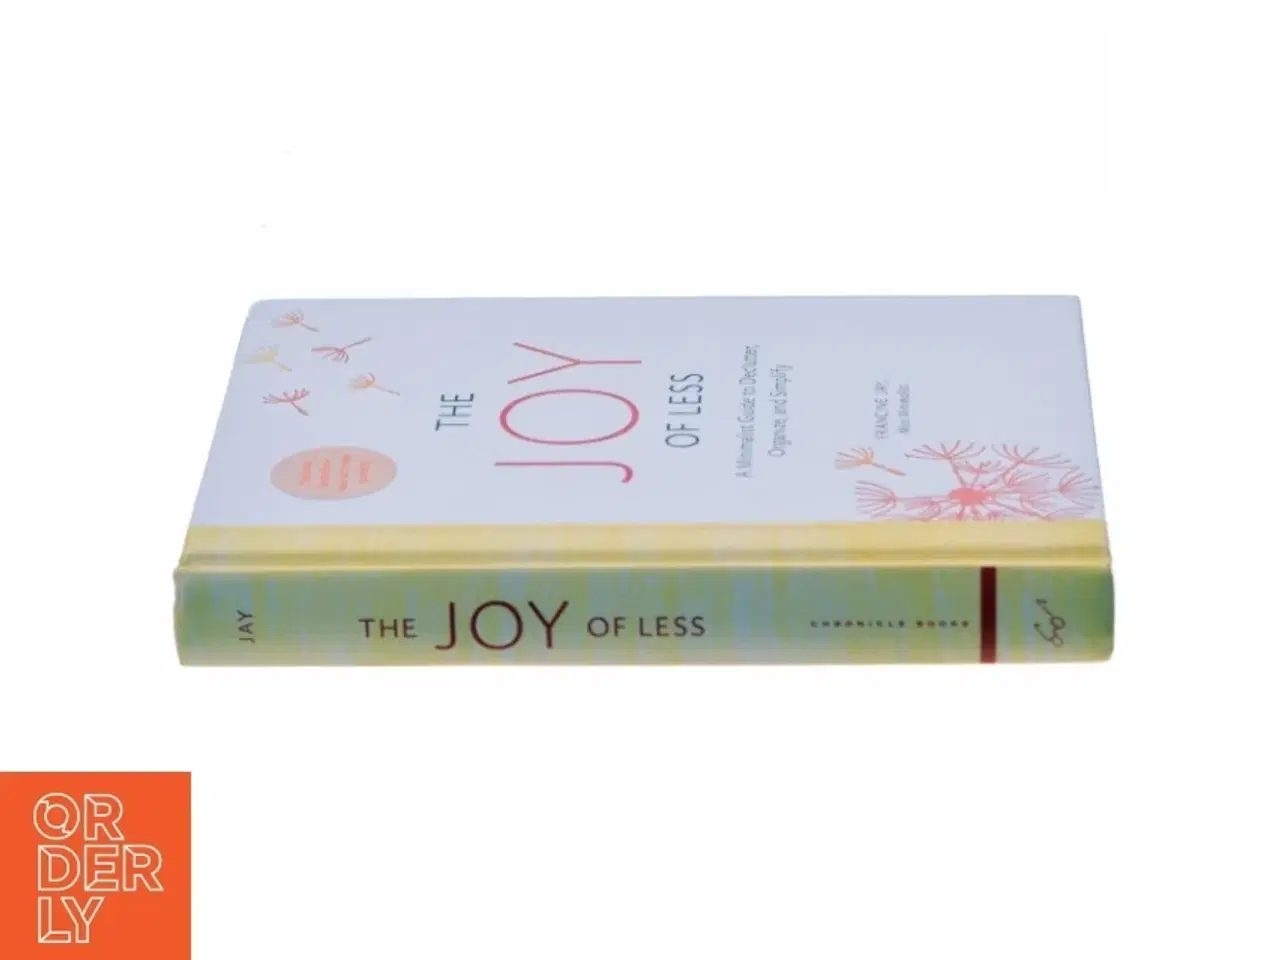 Billede 2 - The Joy of Less: A Minimalist Guide to Declutter, Organize, and Simplify - Updated and Revised (Minimalism Books, Home Organization Books, Declutterin